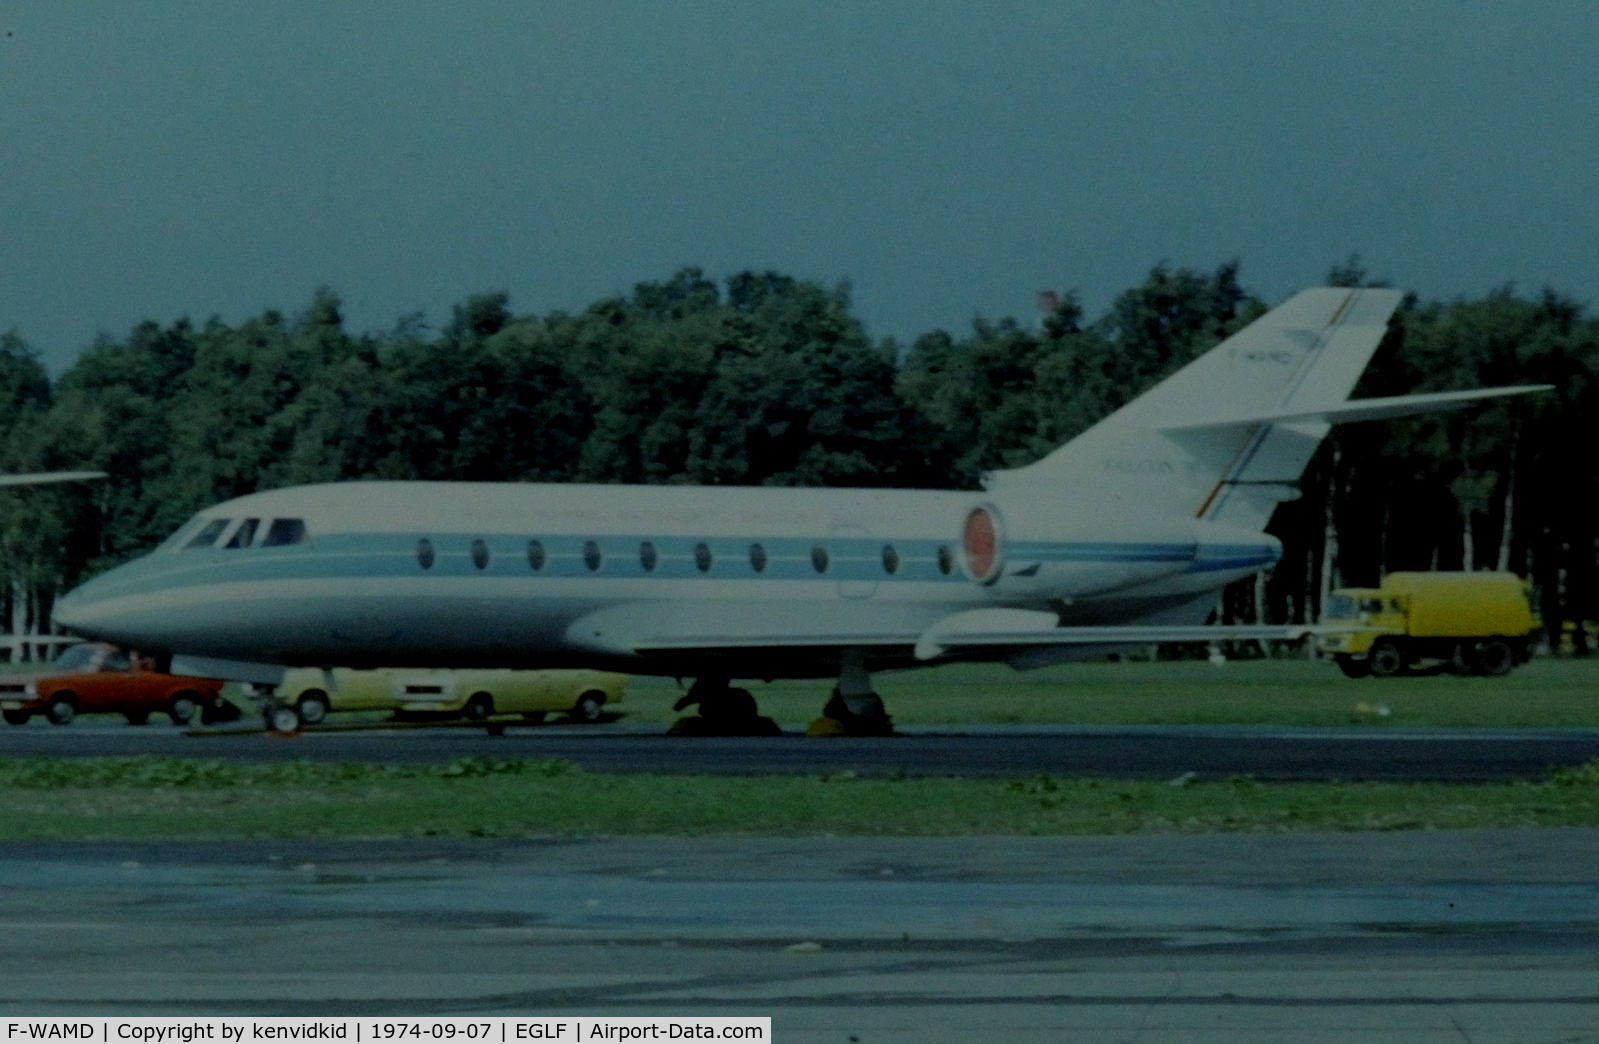 F-WAMD, Dassault Falcon (Mystere) 30 C/N 01, At the 1974 SBAC show, copied from slide. First and only Falcon 30.